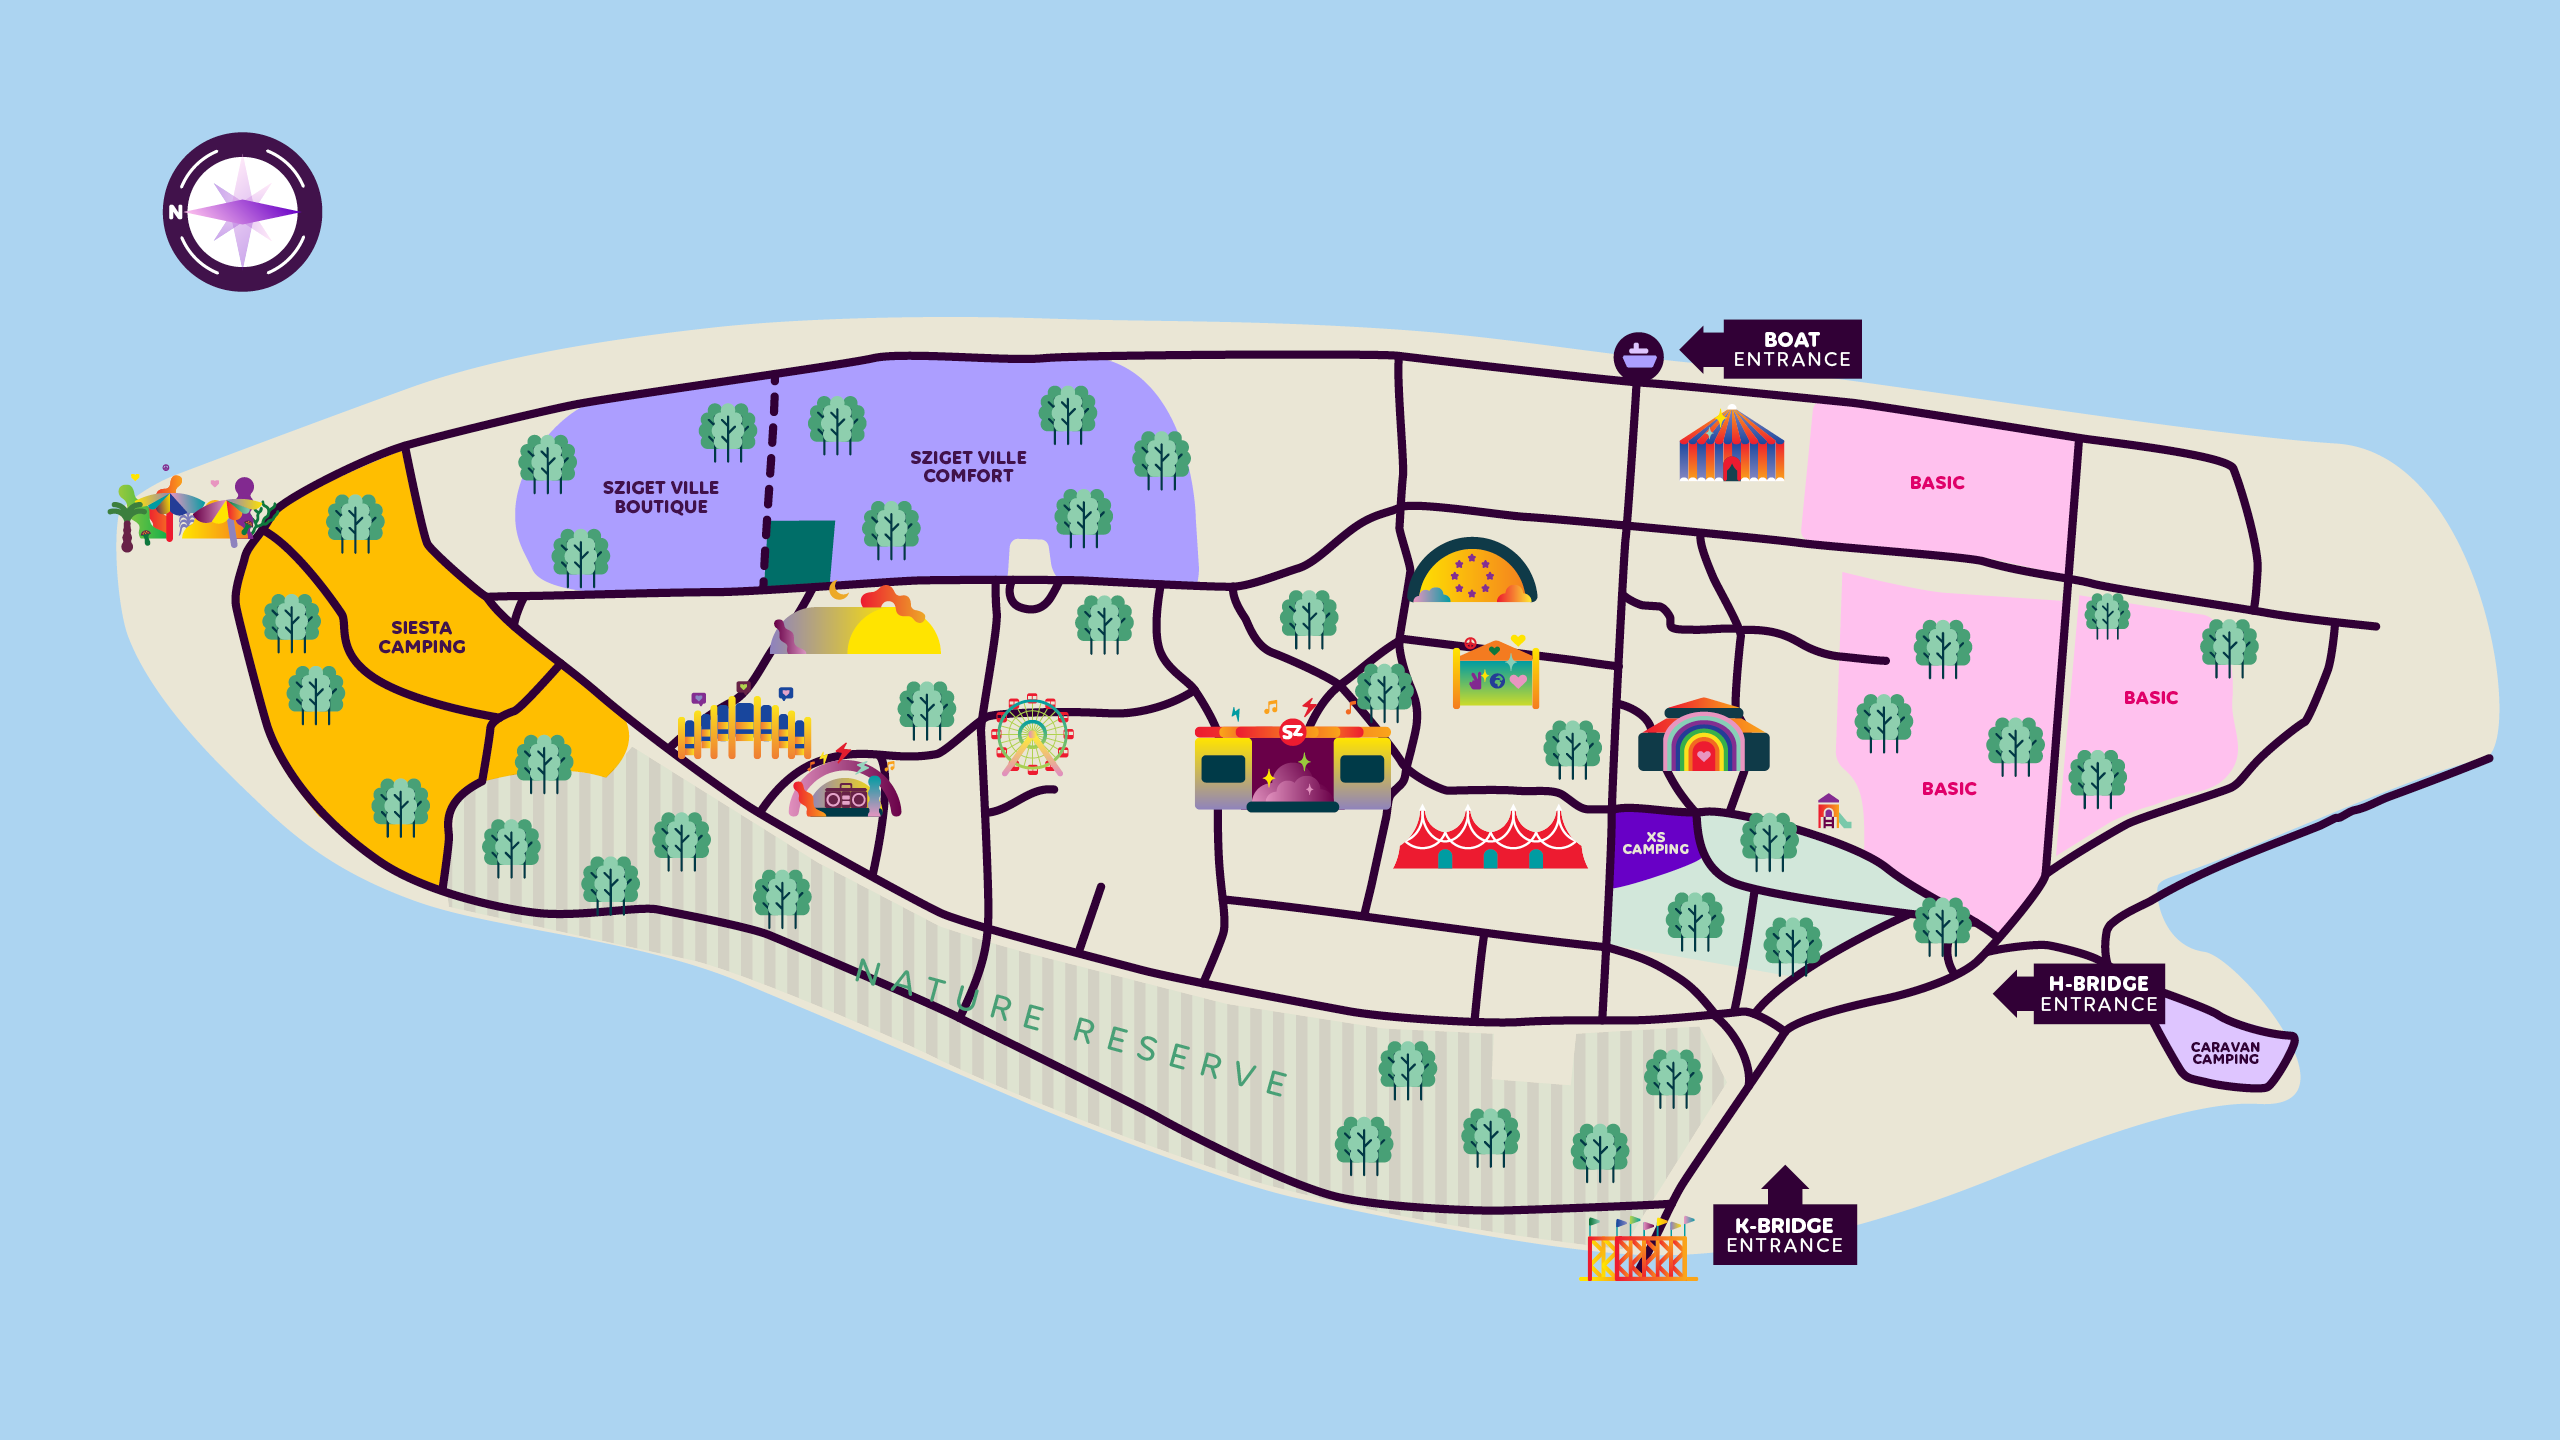 https://cdn2.szigetfestival.com/c1y5fvw/f851/cz/media/2022/11/2023map_camping_plus.png